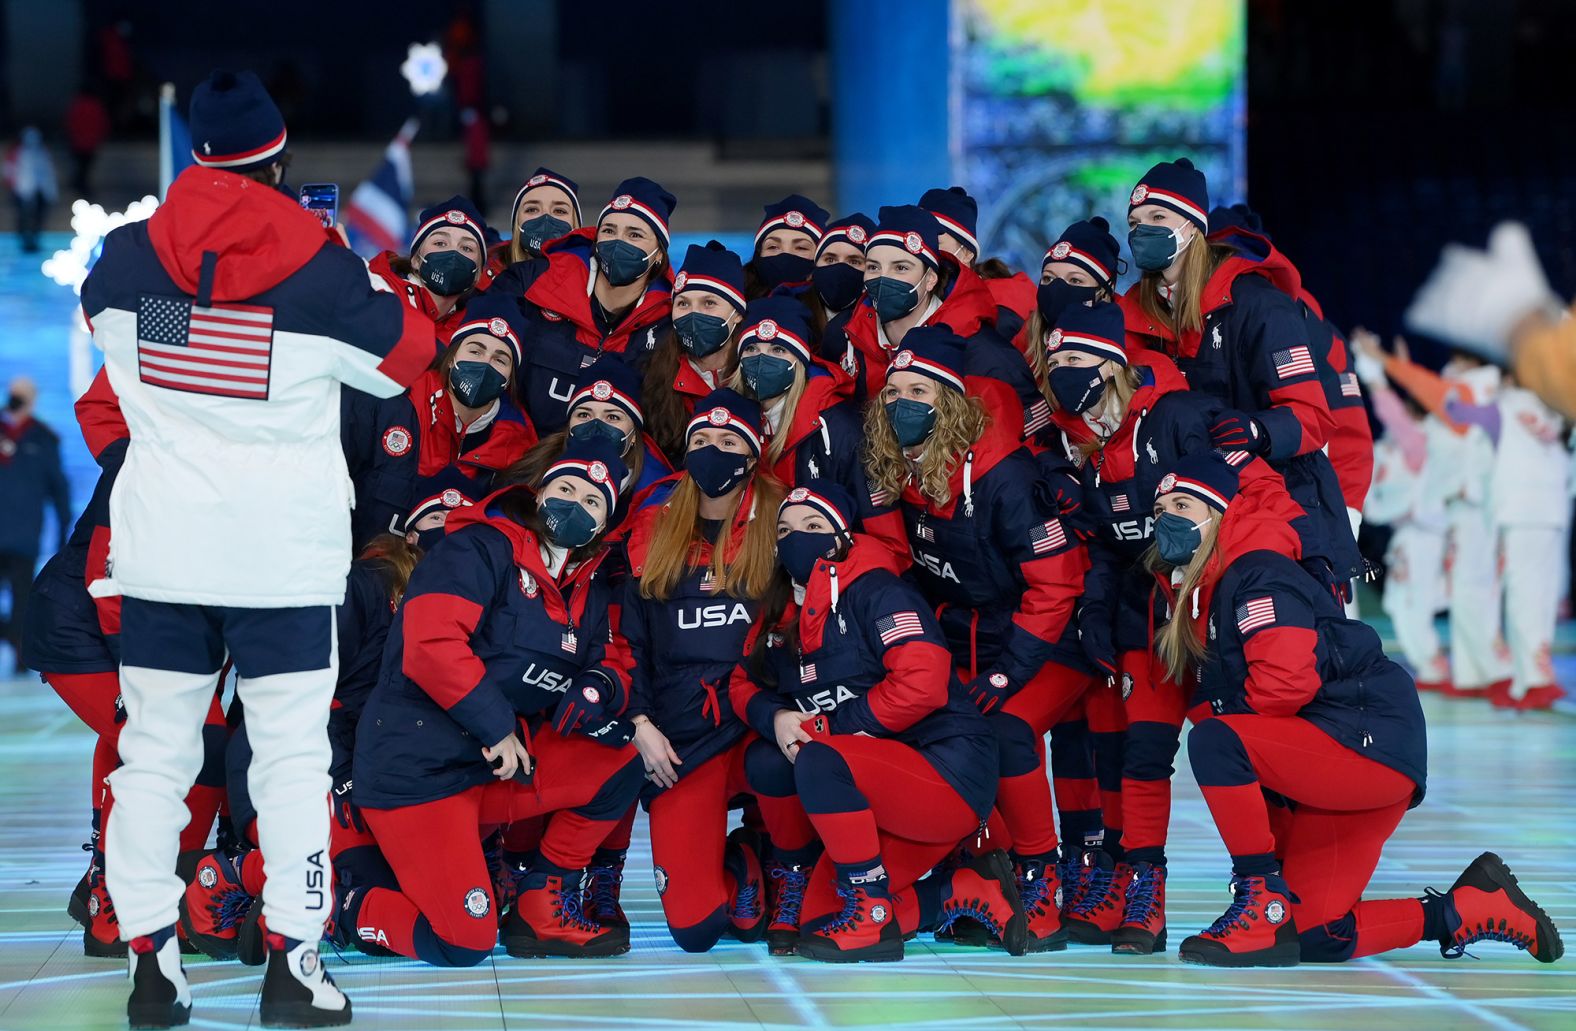 Members of Team USA pose for a photo during the opening ceremony.